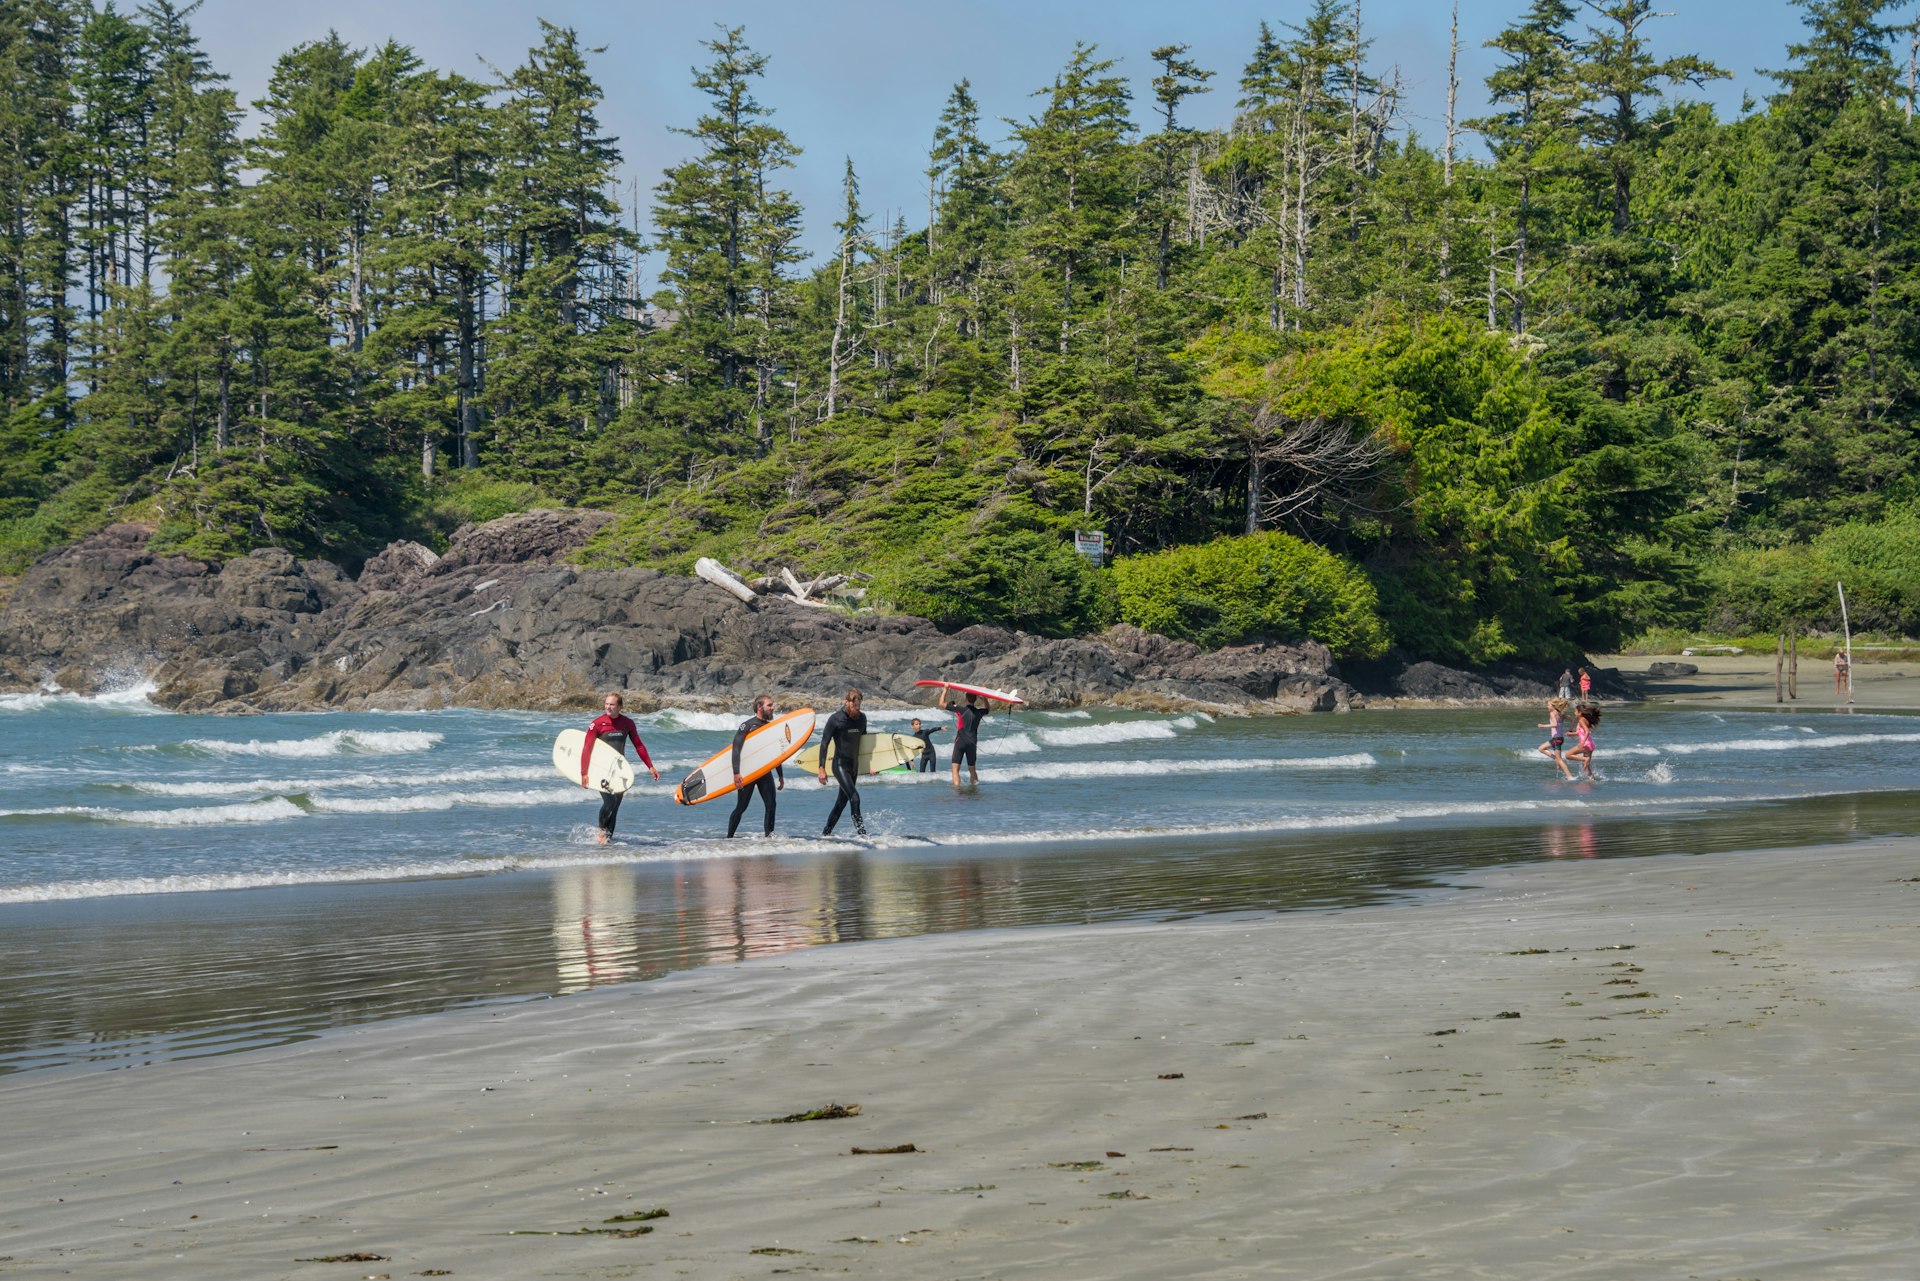 A small group of surfers are carrying surfboards as they leave the water and walk onto the sand of Long Beach, Vancouver Island